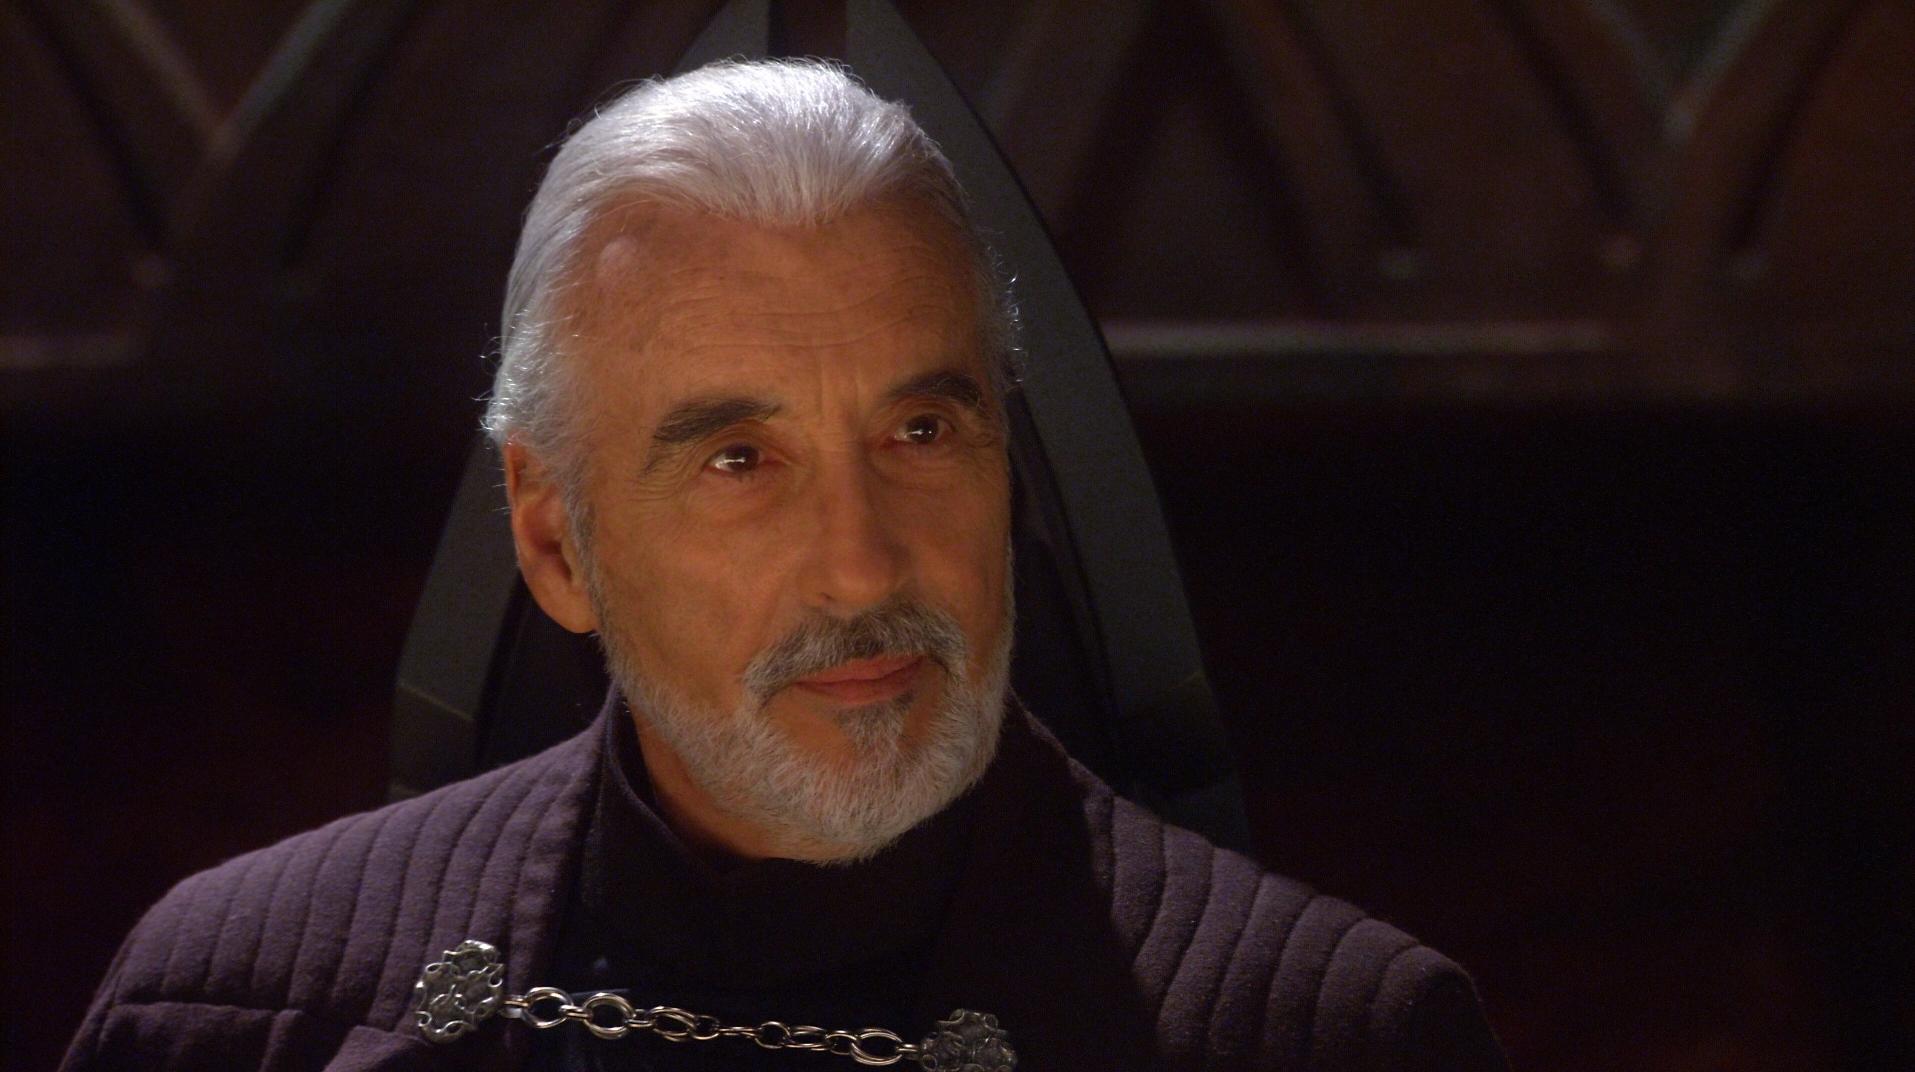 Download Count Dooku wallpapers for mobile phone free Count Dooku HD  pictures